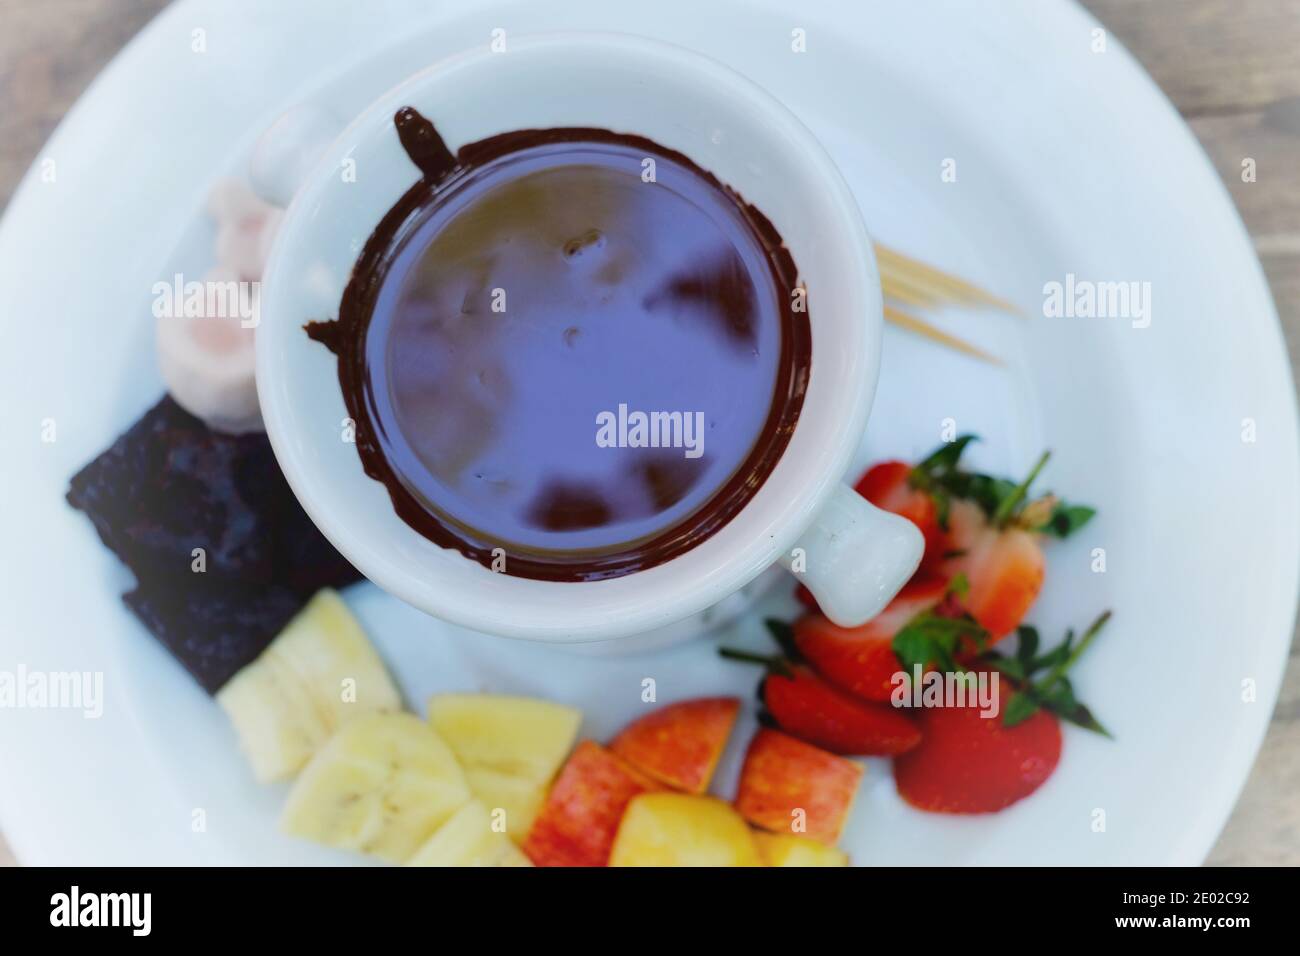 The top view of a set of chocolate fondue with fruits and cakes and toothpick for dipping into hot chocolate with white dish and pot. Stock Photo